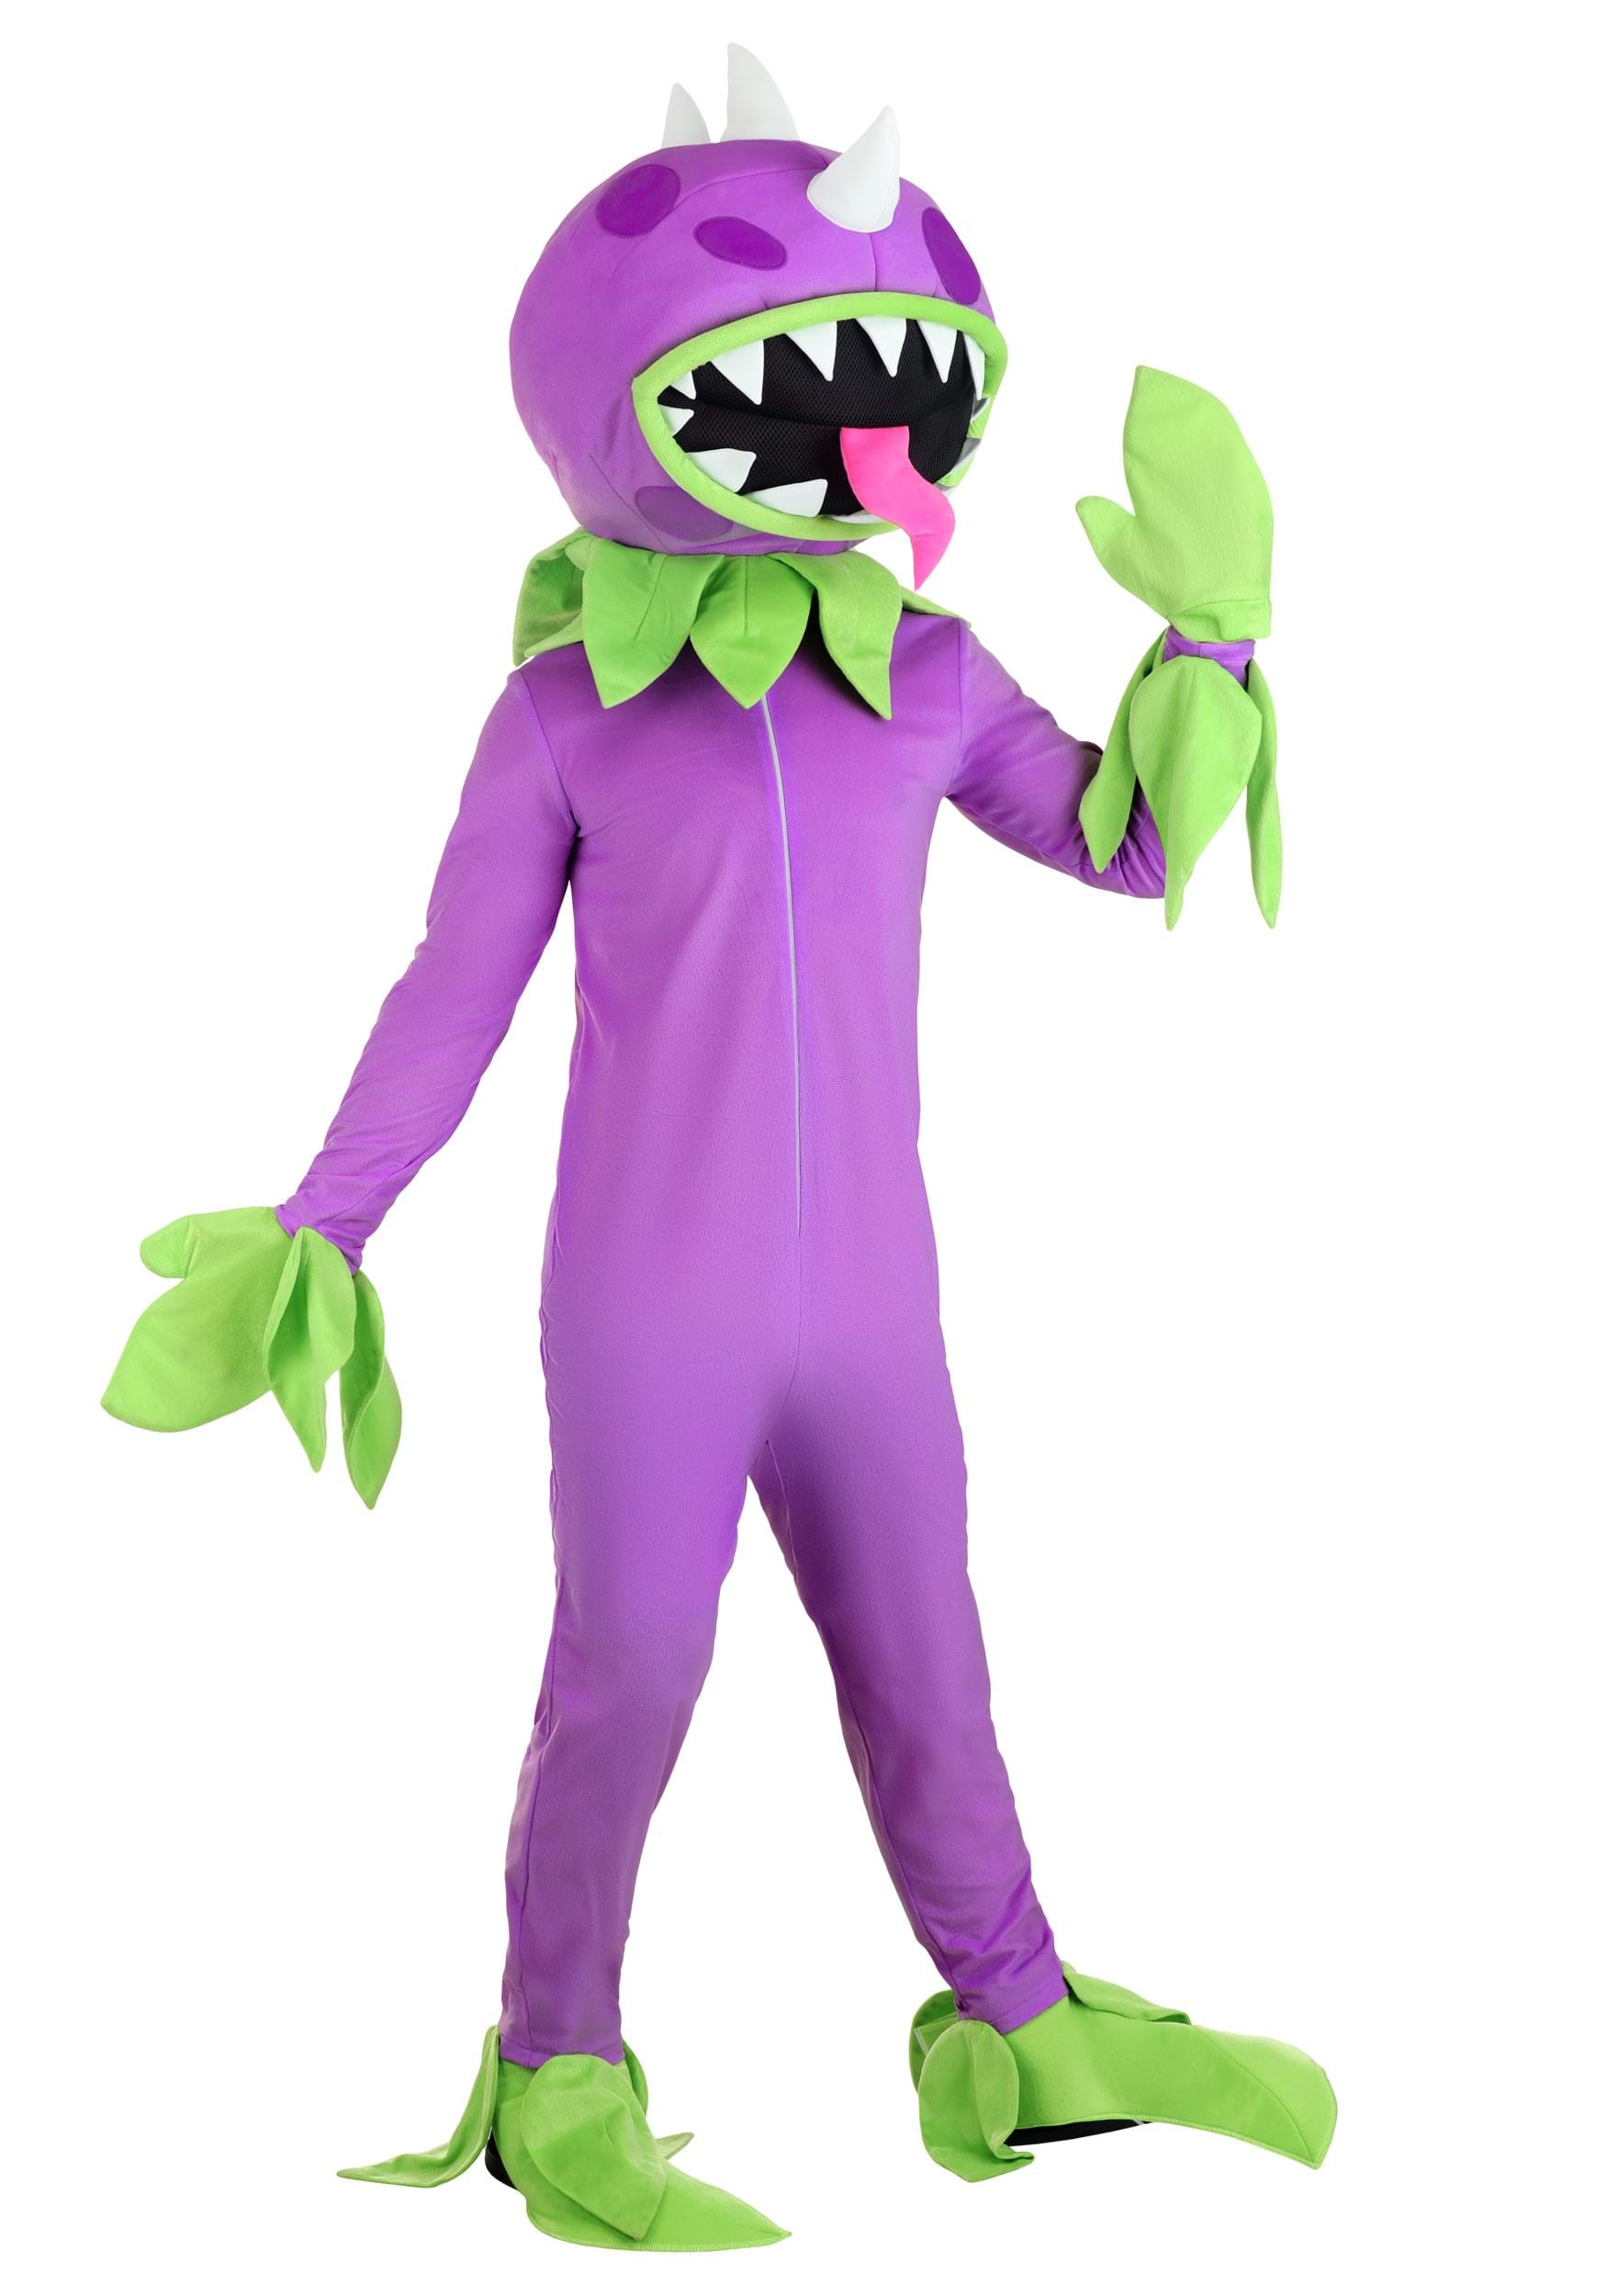 Photos - Fancy Dress FUN Costumes Plants vs Zombies Chomper Costume for Adults Green/Purple